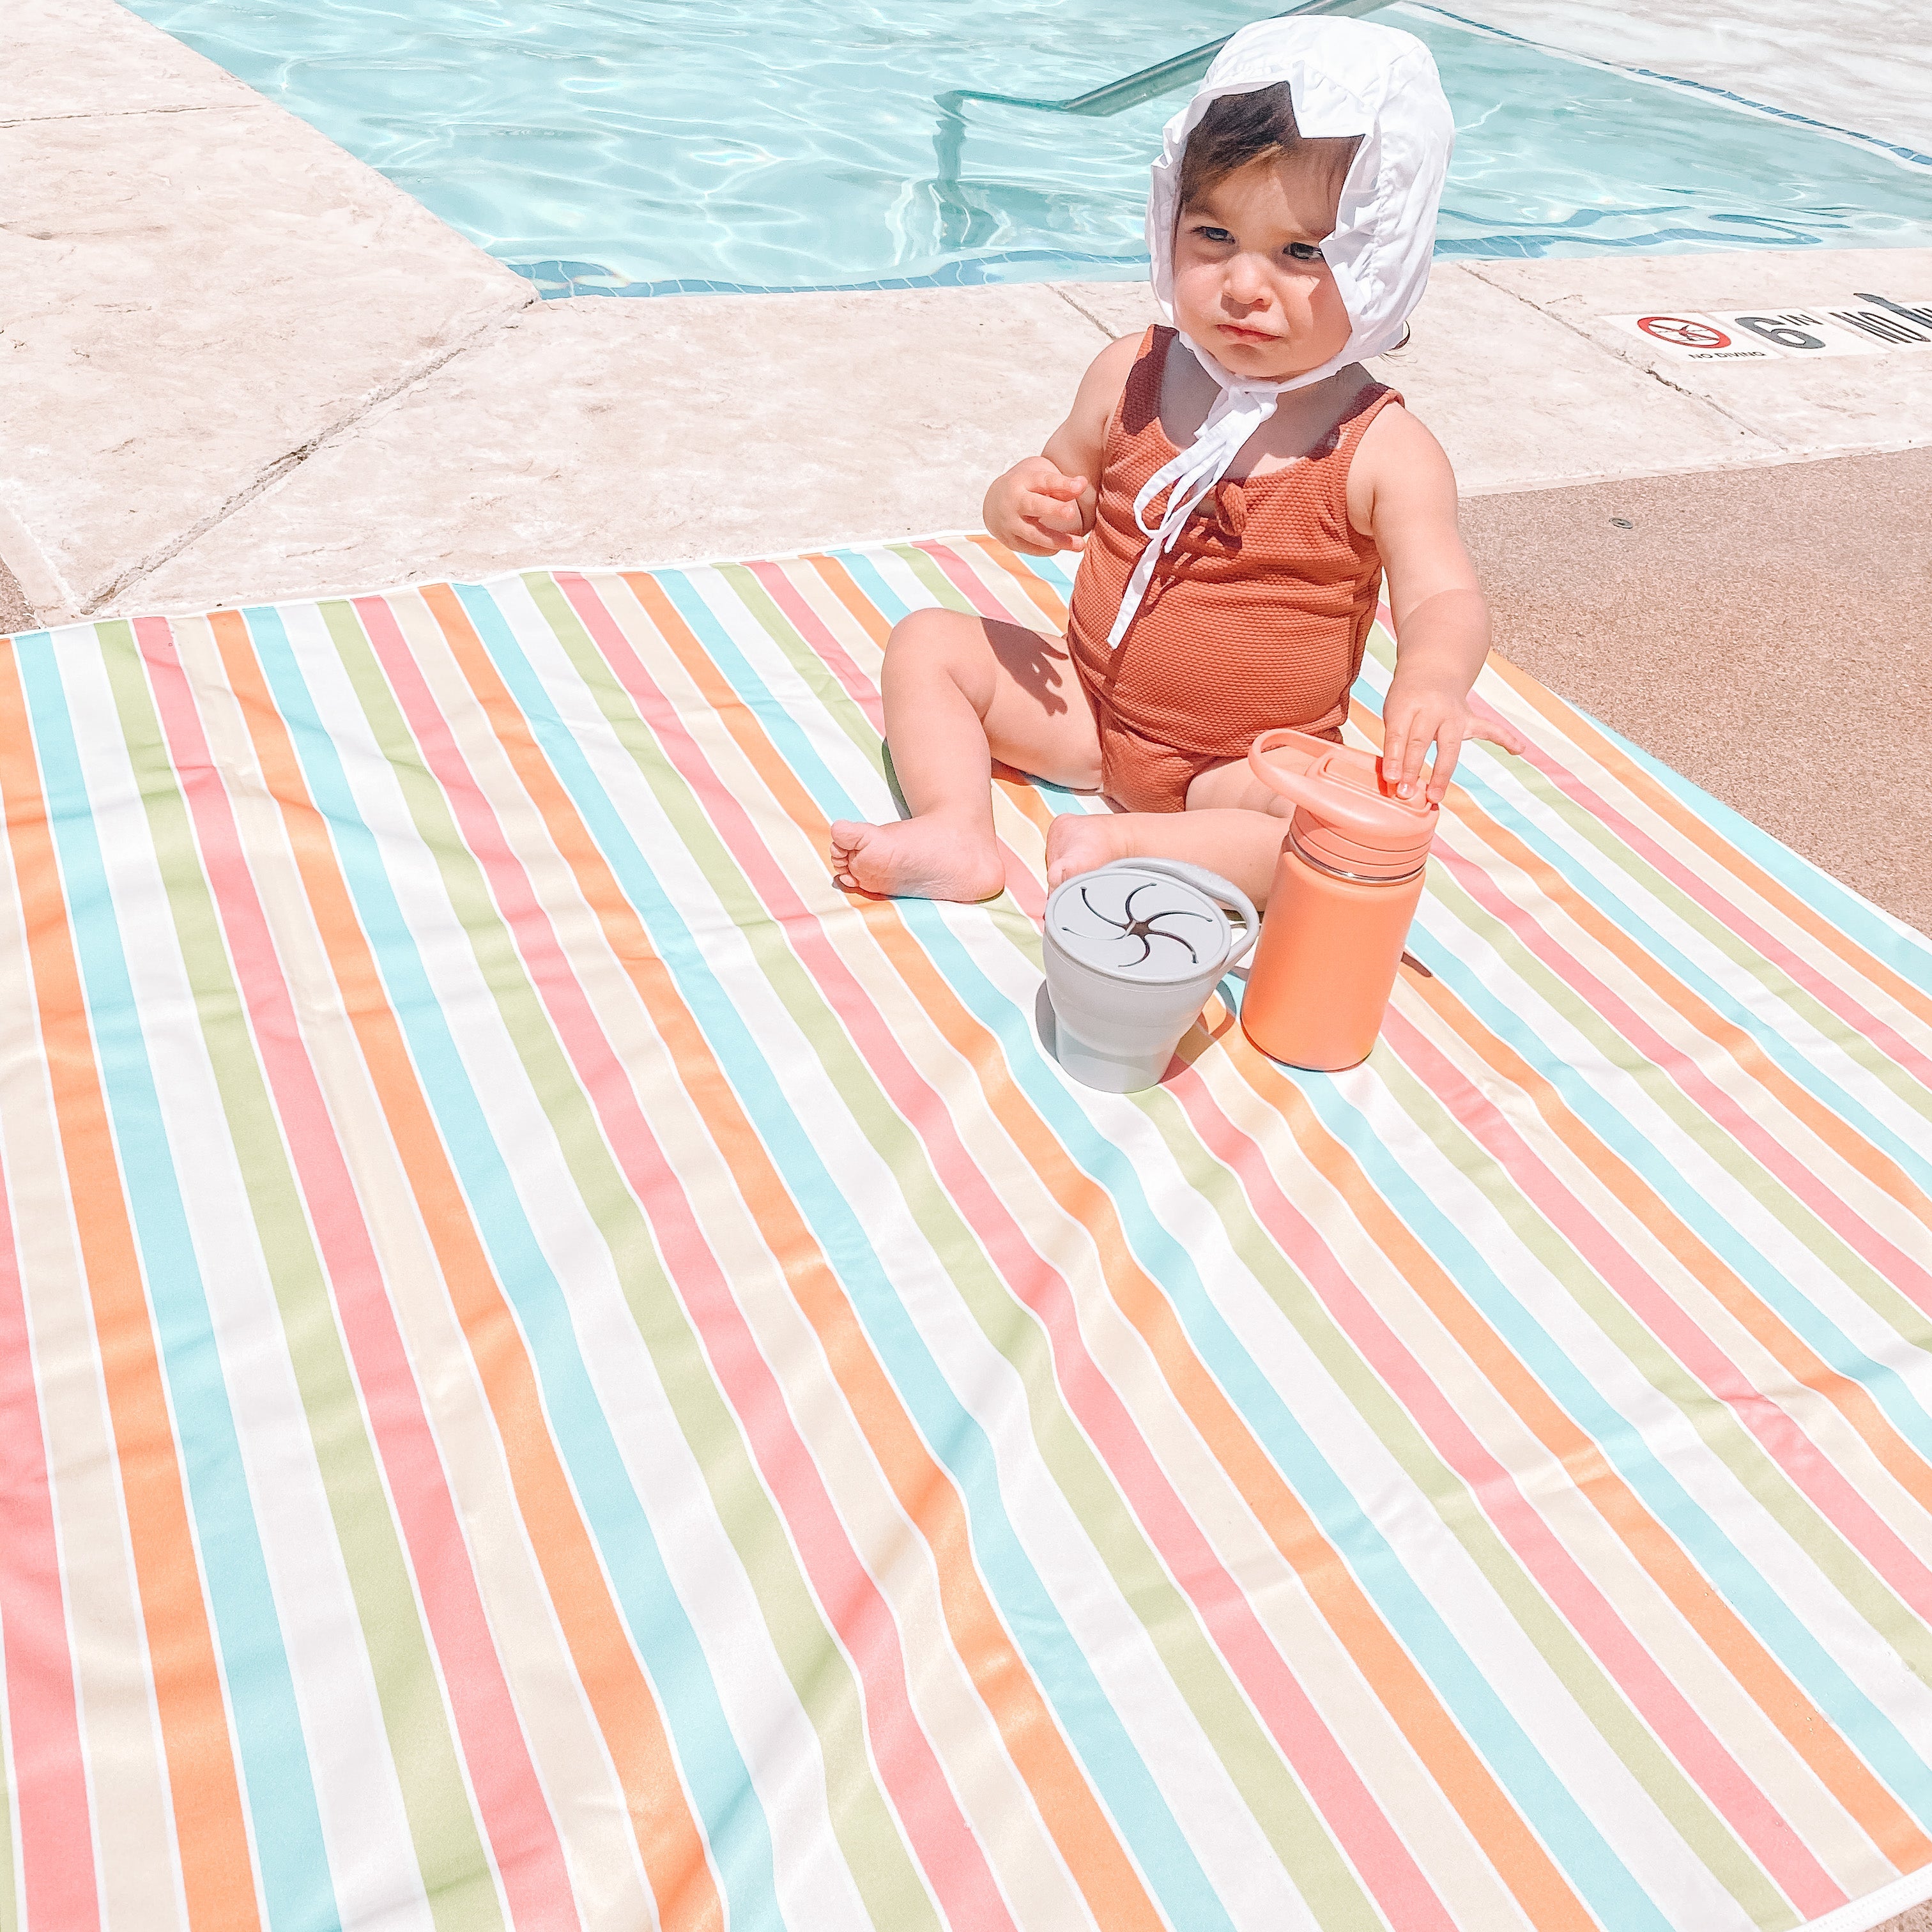 Rainbow Stripes Splash Mat - A Waterproof Catch-all For Highchair Spills And More!